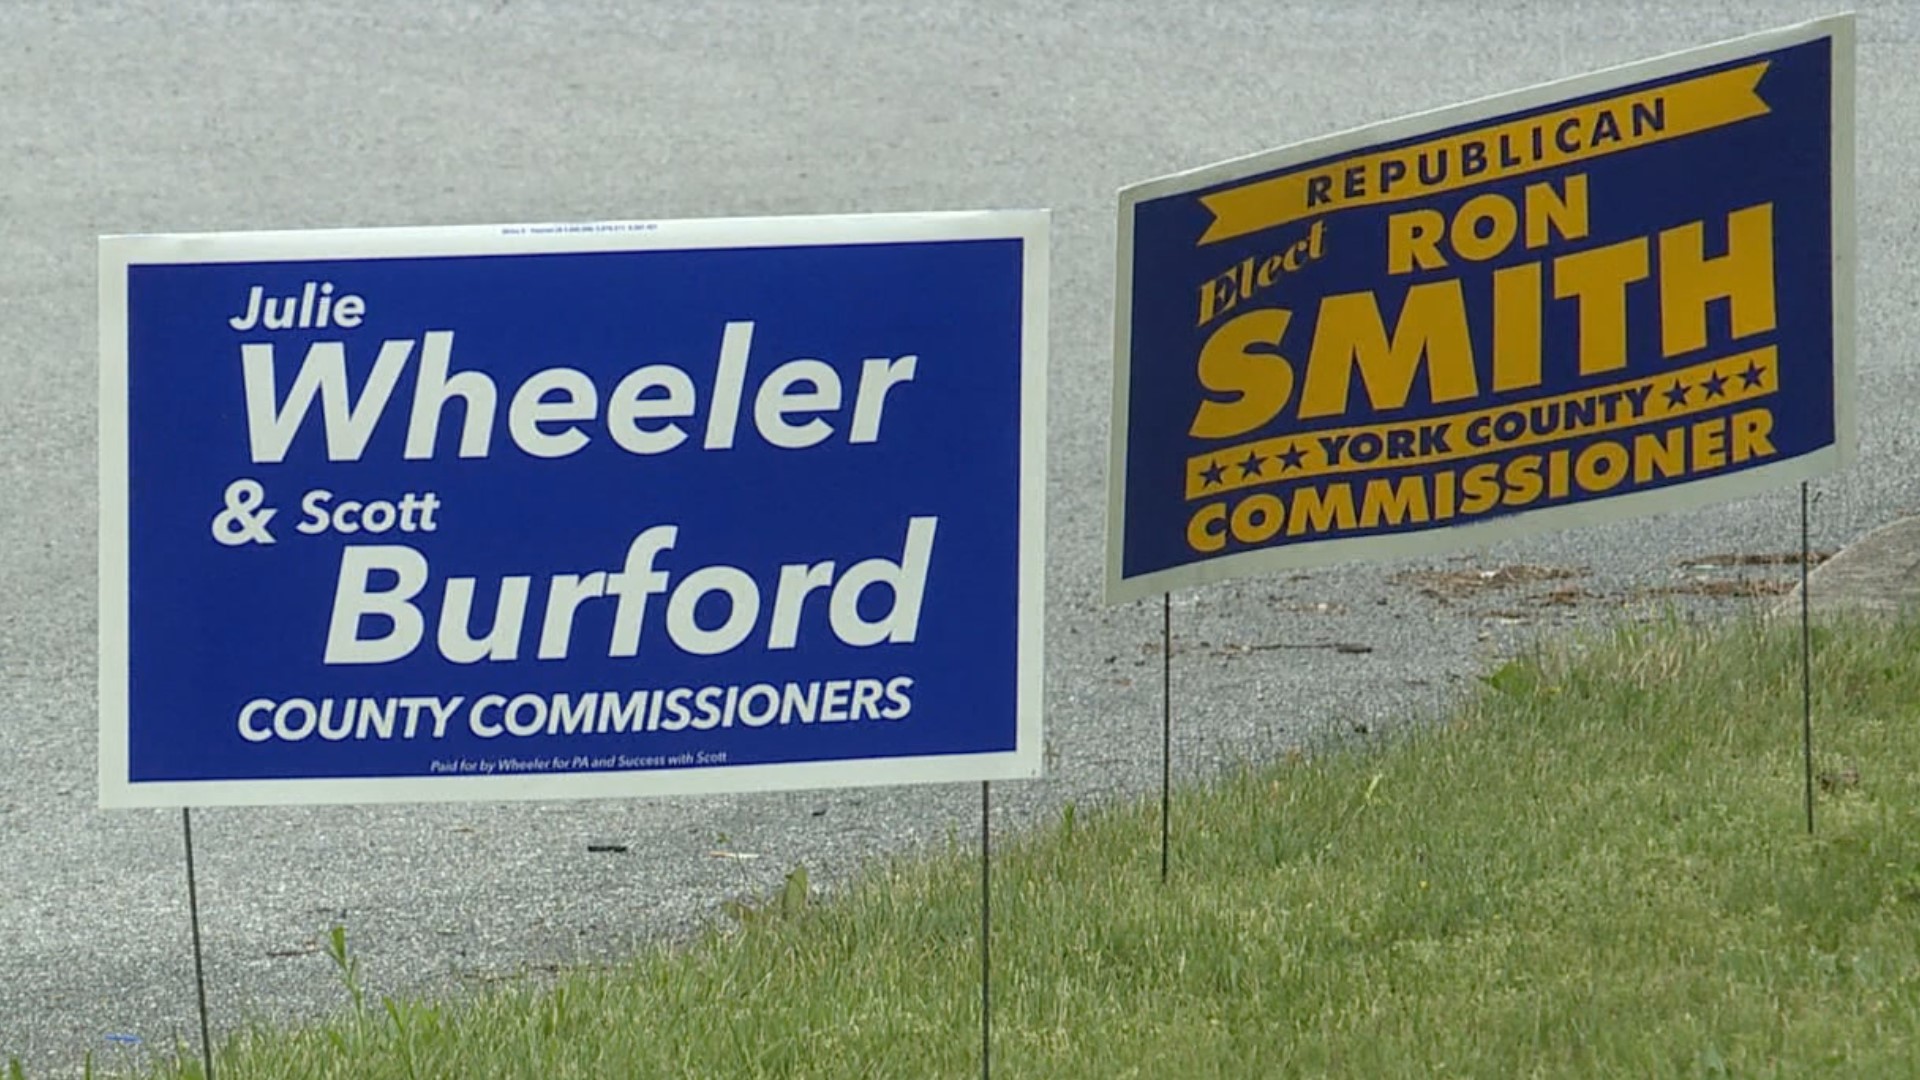 President Commissioner Julie Wheeler has backed newcomer Scott Burford against the incumbent commissioner, Ron Smith.